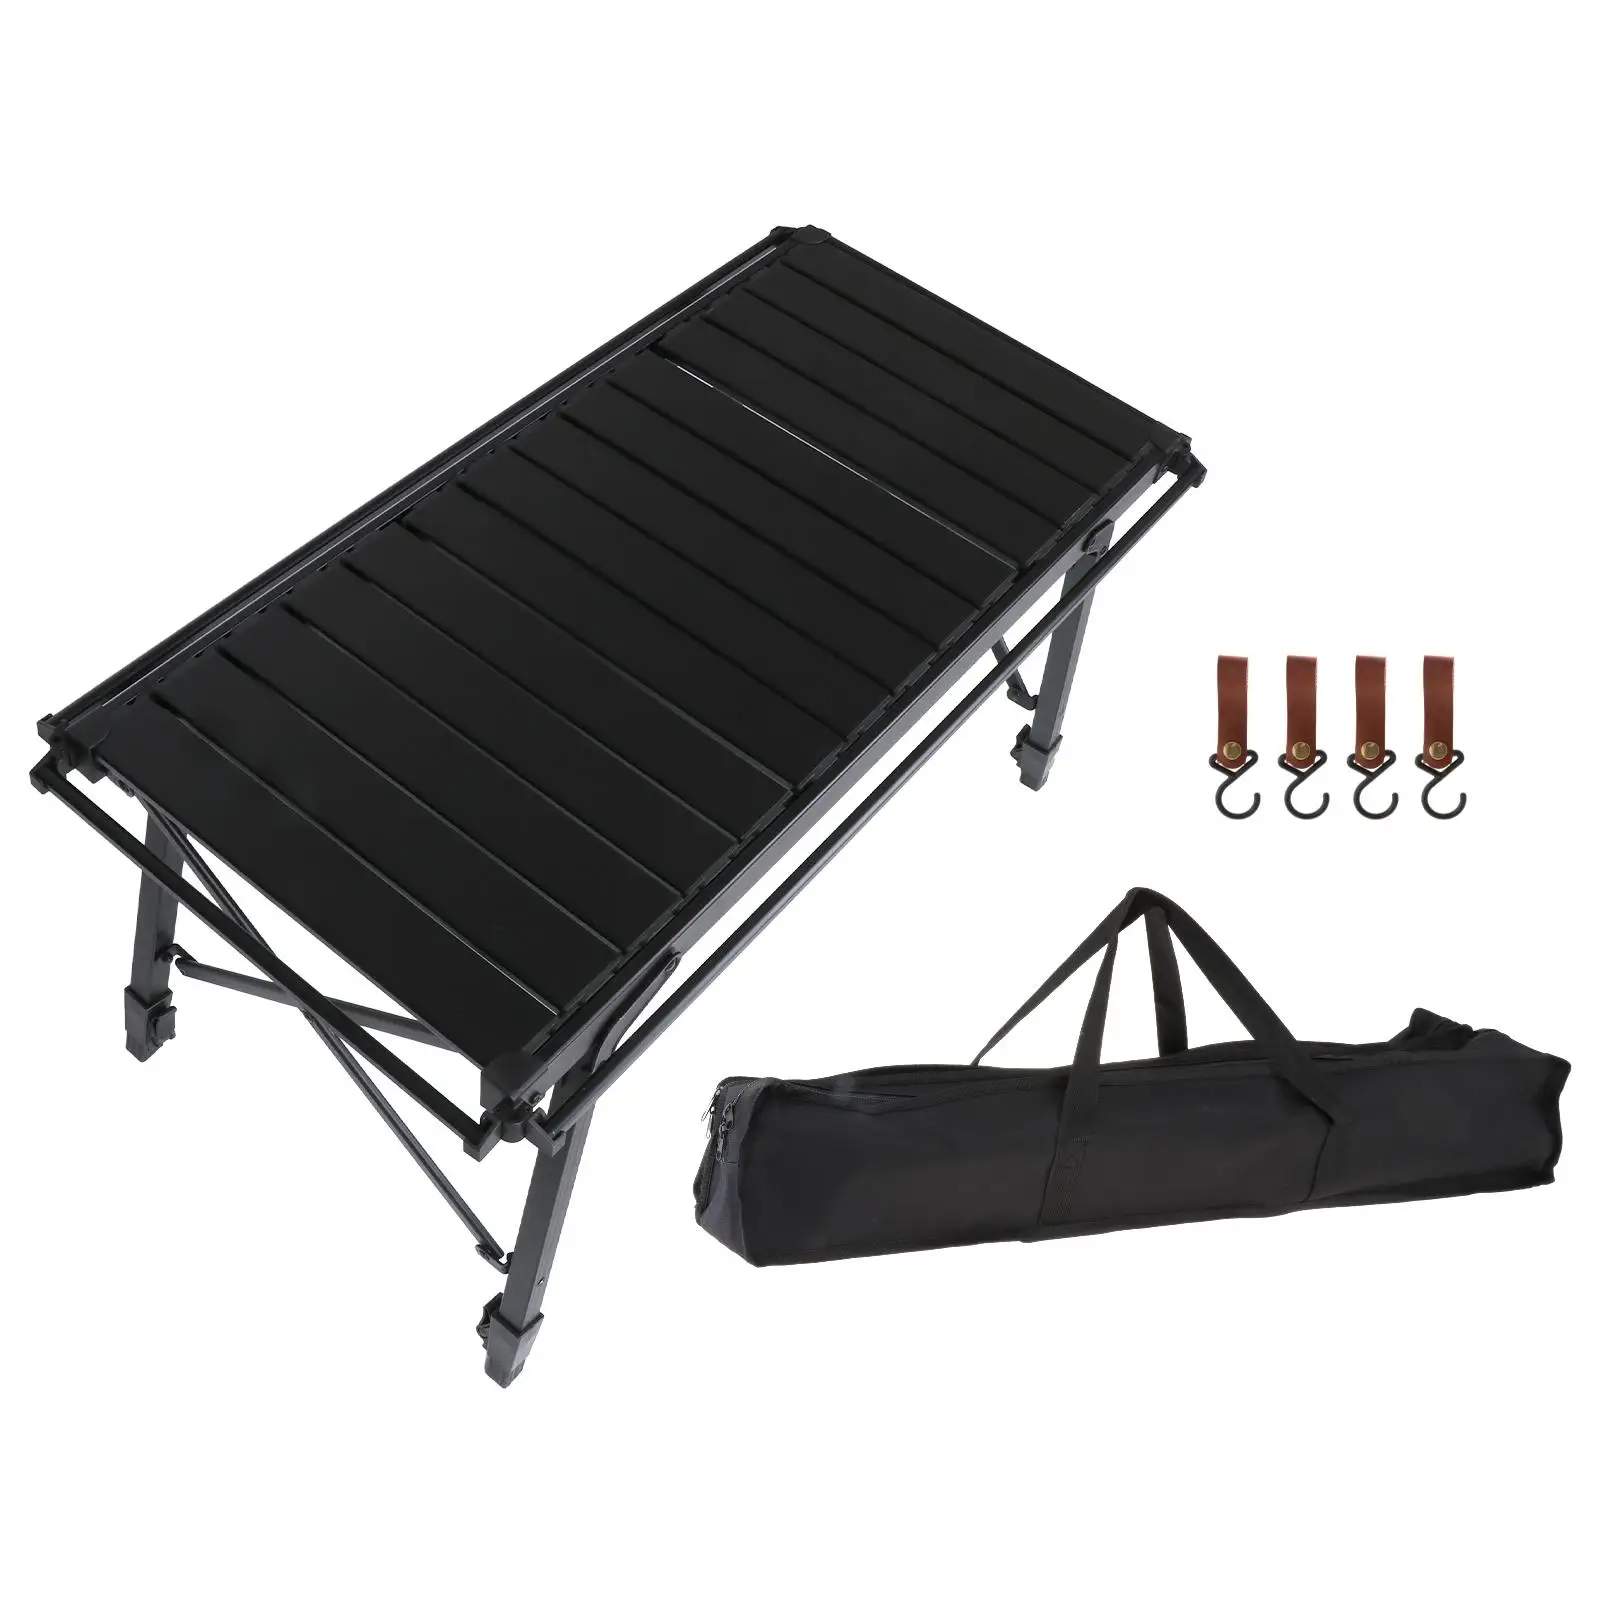 Camping Folding Table Portable Easy to Carry Travel Table, Outdoor Table Foldable Table for BBQ Picnic Outdoor Cooking